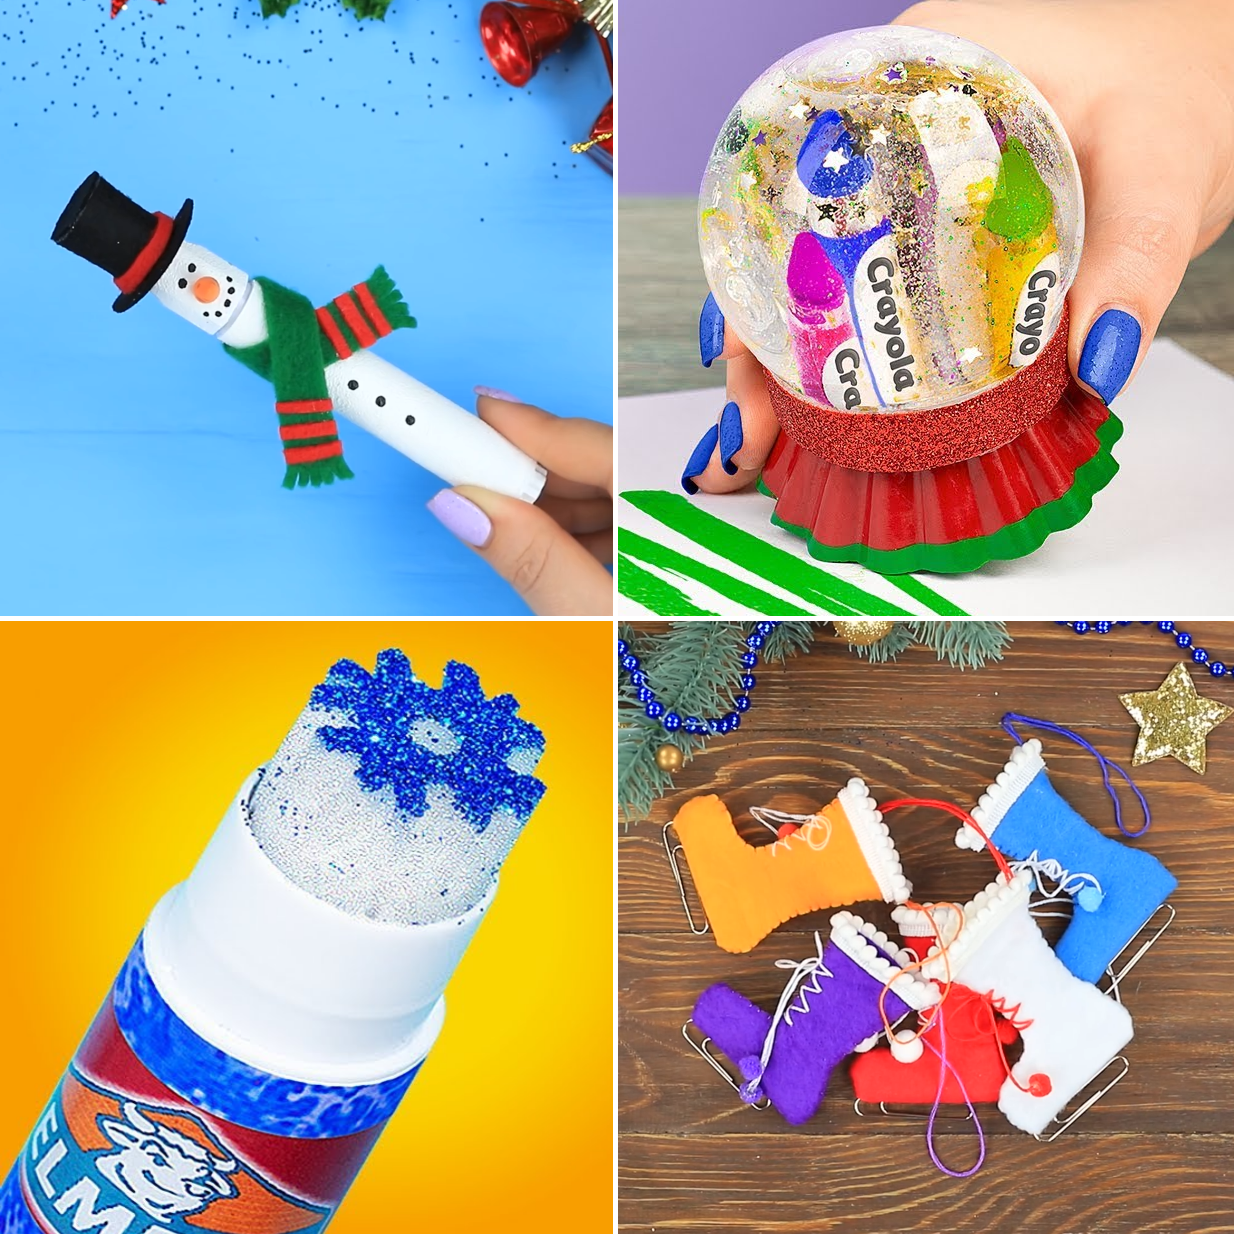 Candy Cane Reindeer Craft Ideas for Christmas - K4 Feed